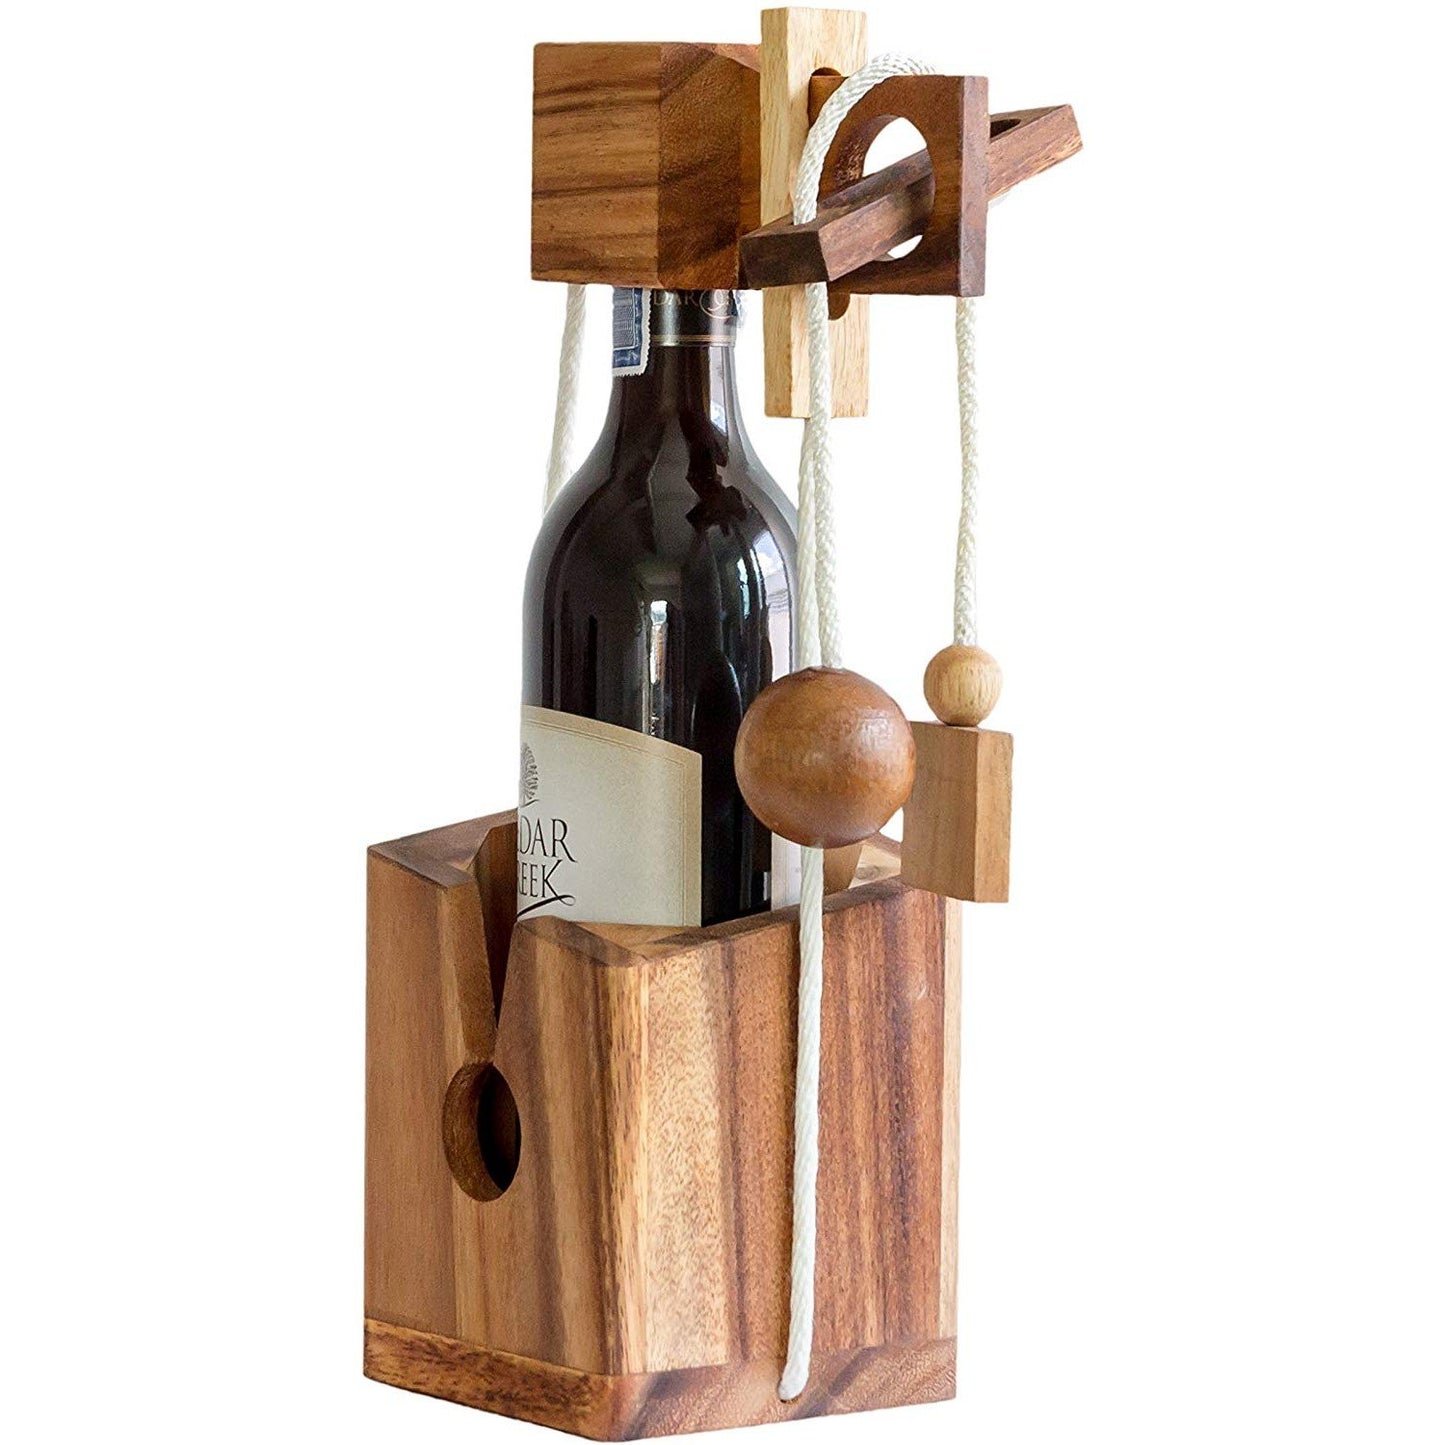 Wine Bottle Puzzle San Francisco - Solve It! Think Out of the Box